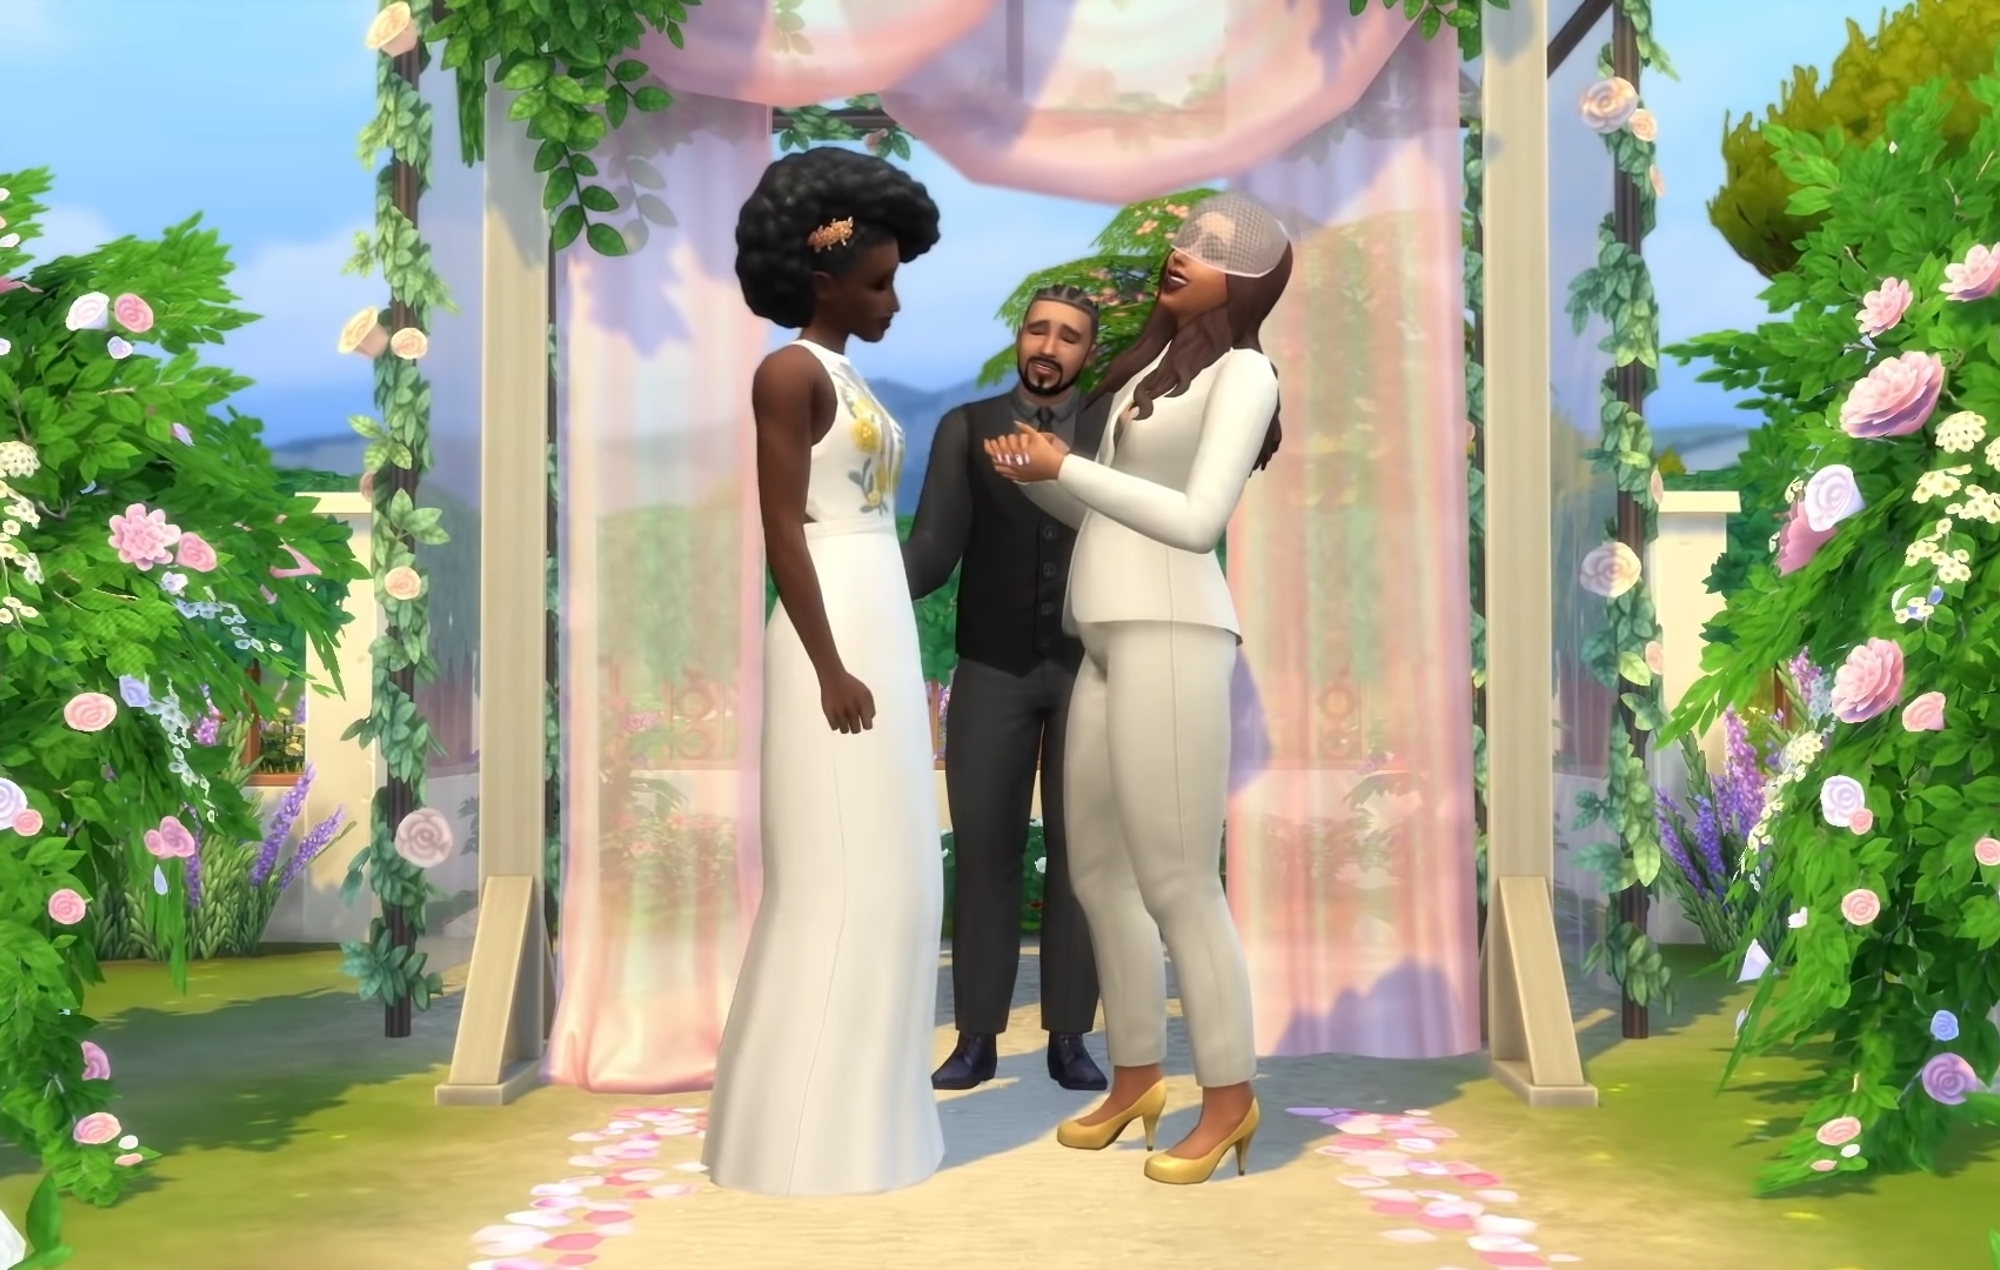 THE SIMS 4 MY WEDDING STORIES RELEASE DELETED TO FEBRUARY 23RD